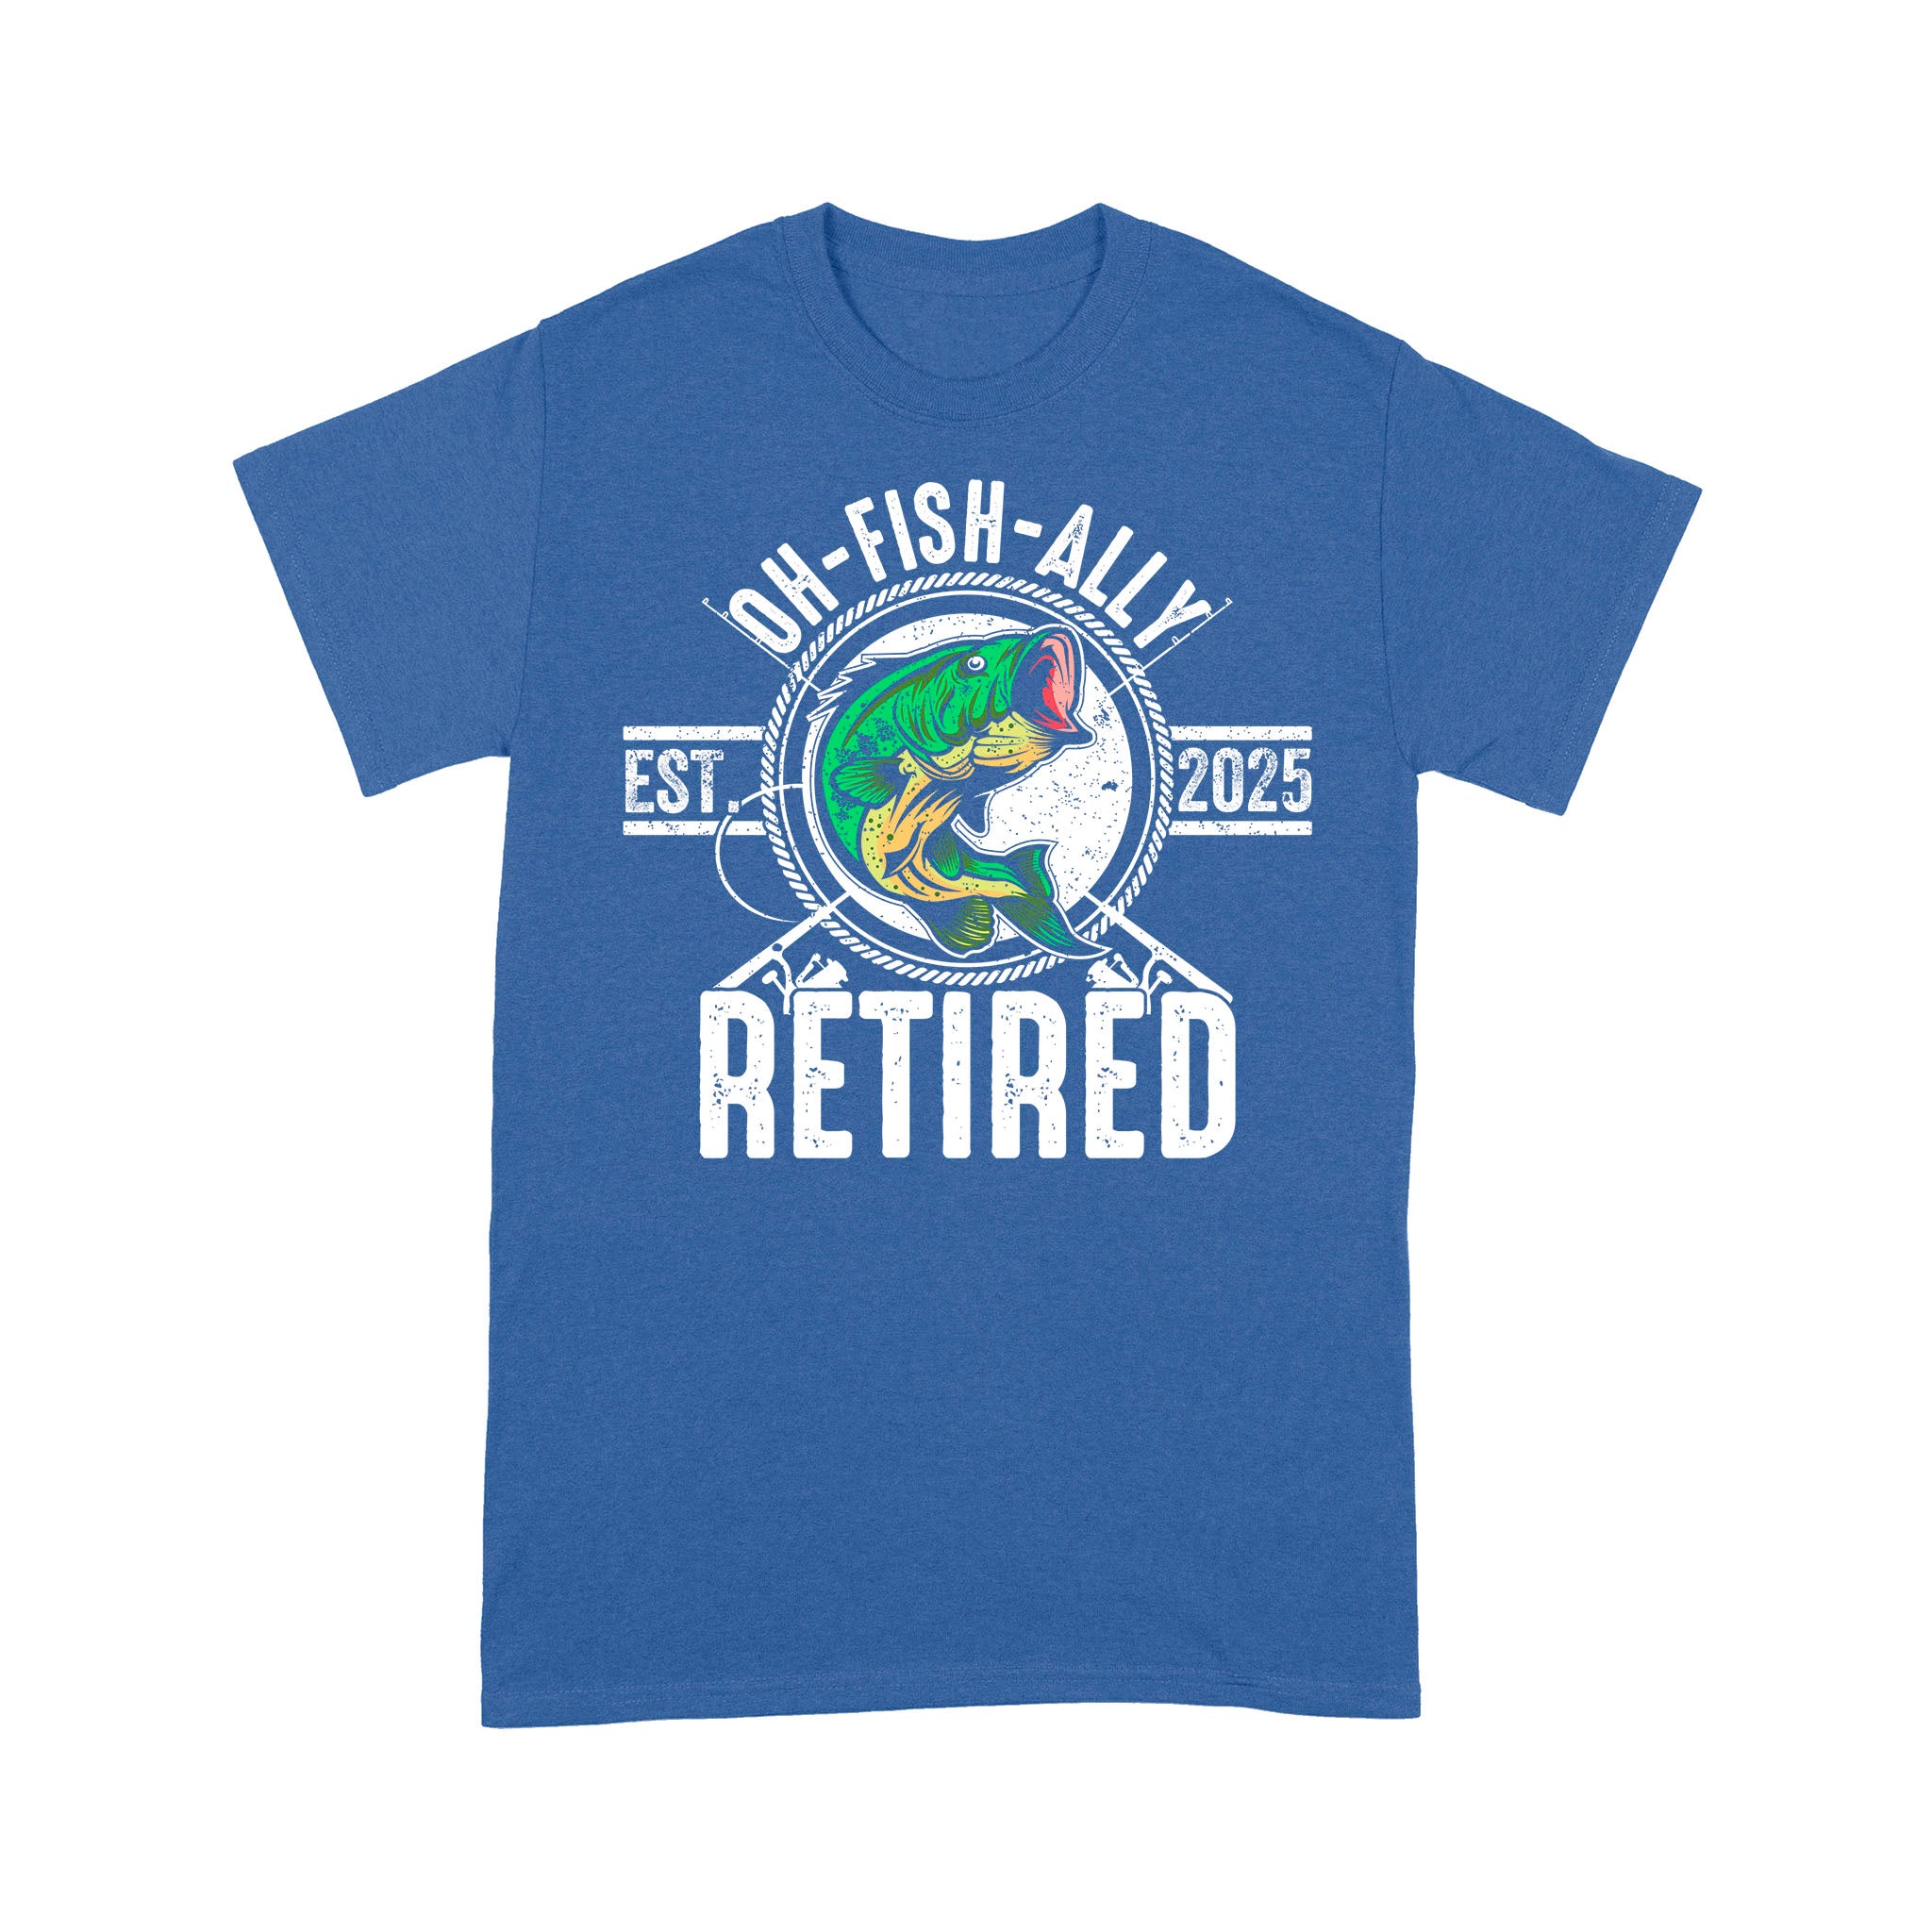 Bass Fishing Oh-fish-ally retired est 2025 T Shirts, Funny retired Fishing Shirts FFS - IPHW1771